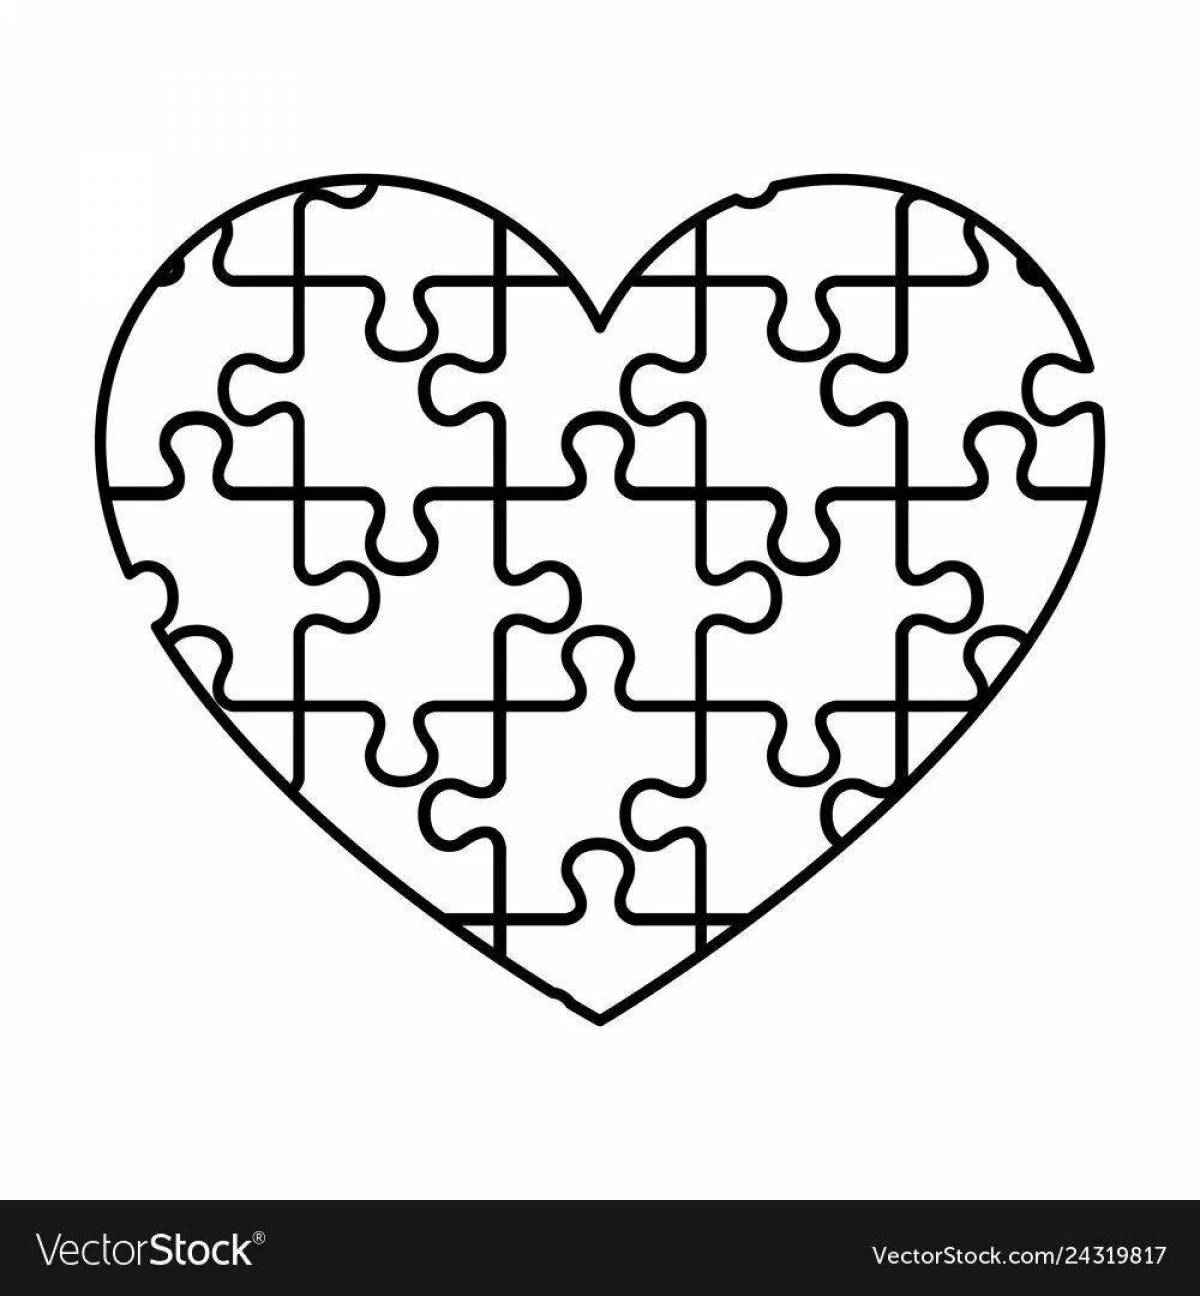 Glorious heart coloring page